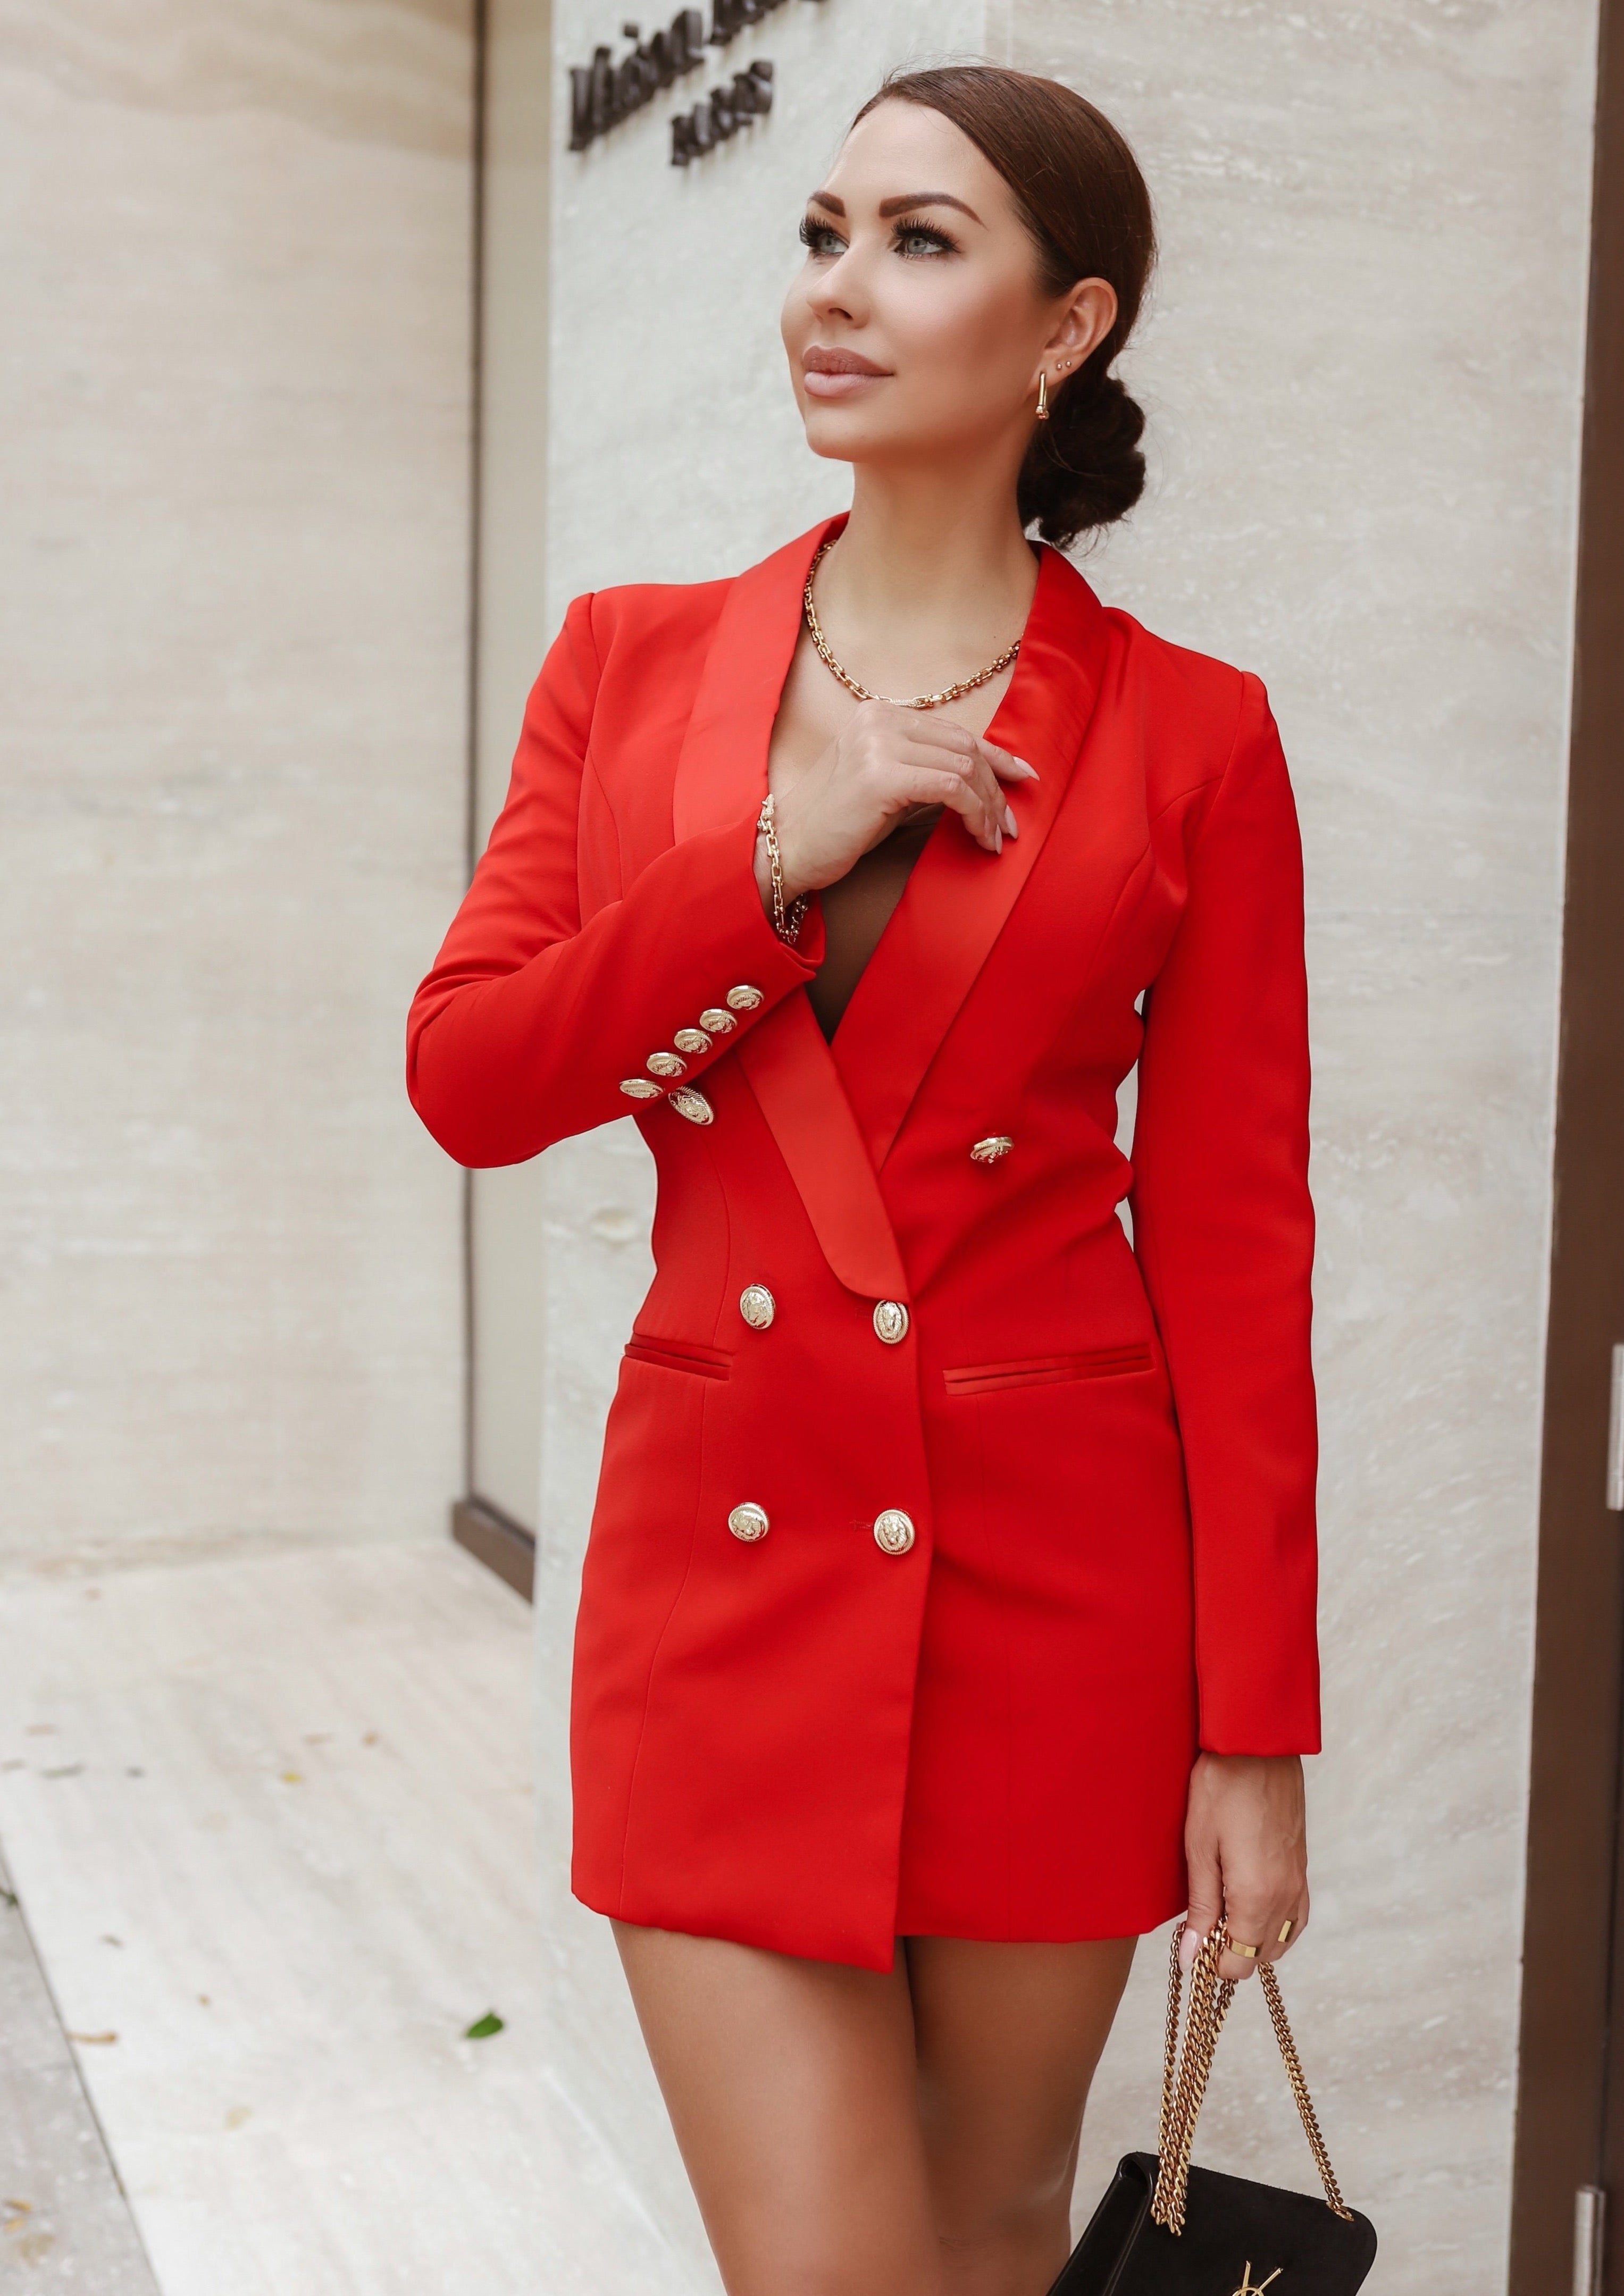 Satin Collar Blazer Dress With Gold Tone Buttons - Red